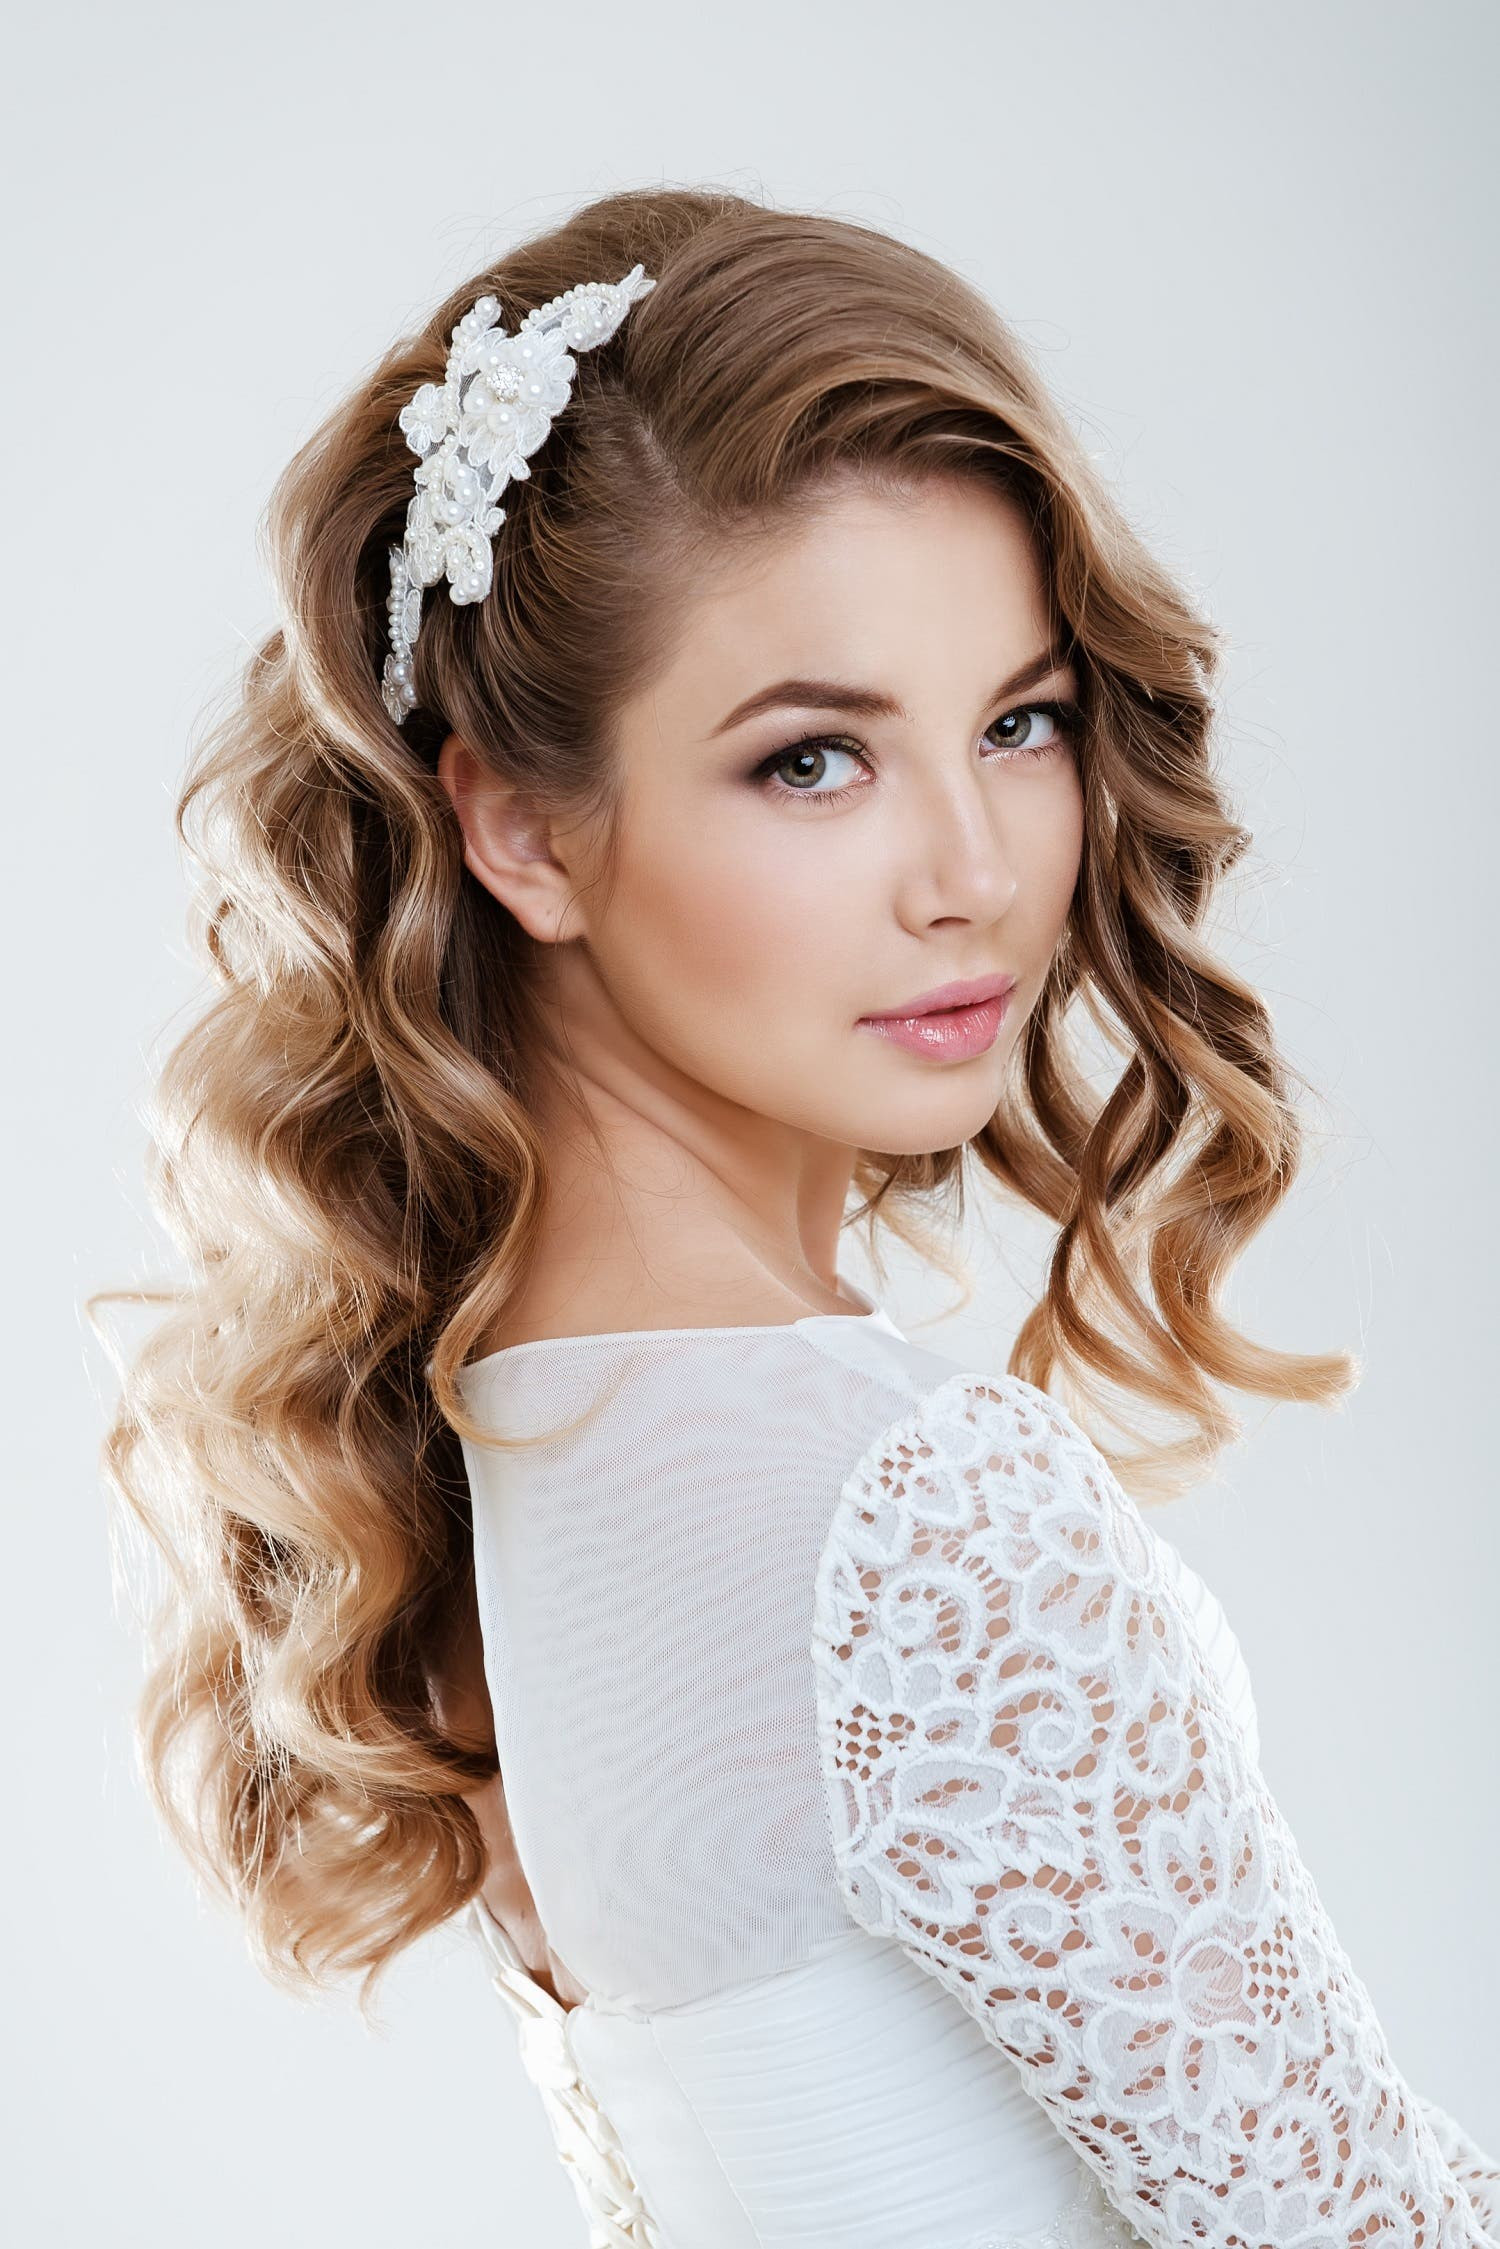 Wedding Hairstyles
 Choosing the perfect hairstyle to match your wedding dress